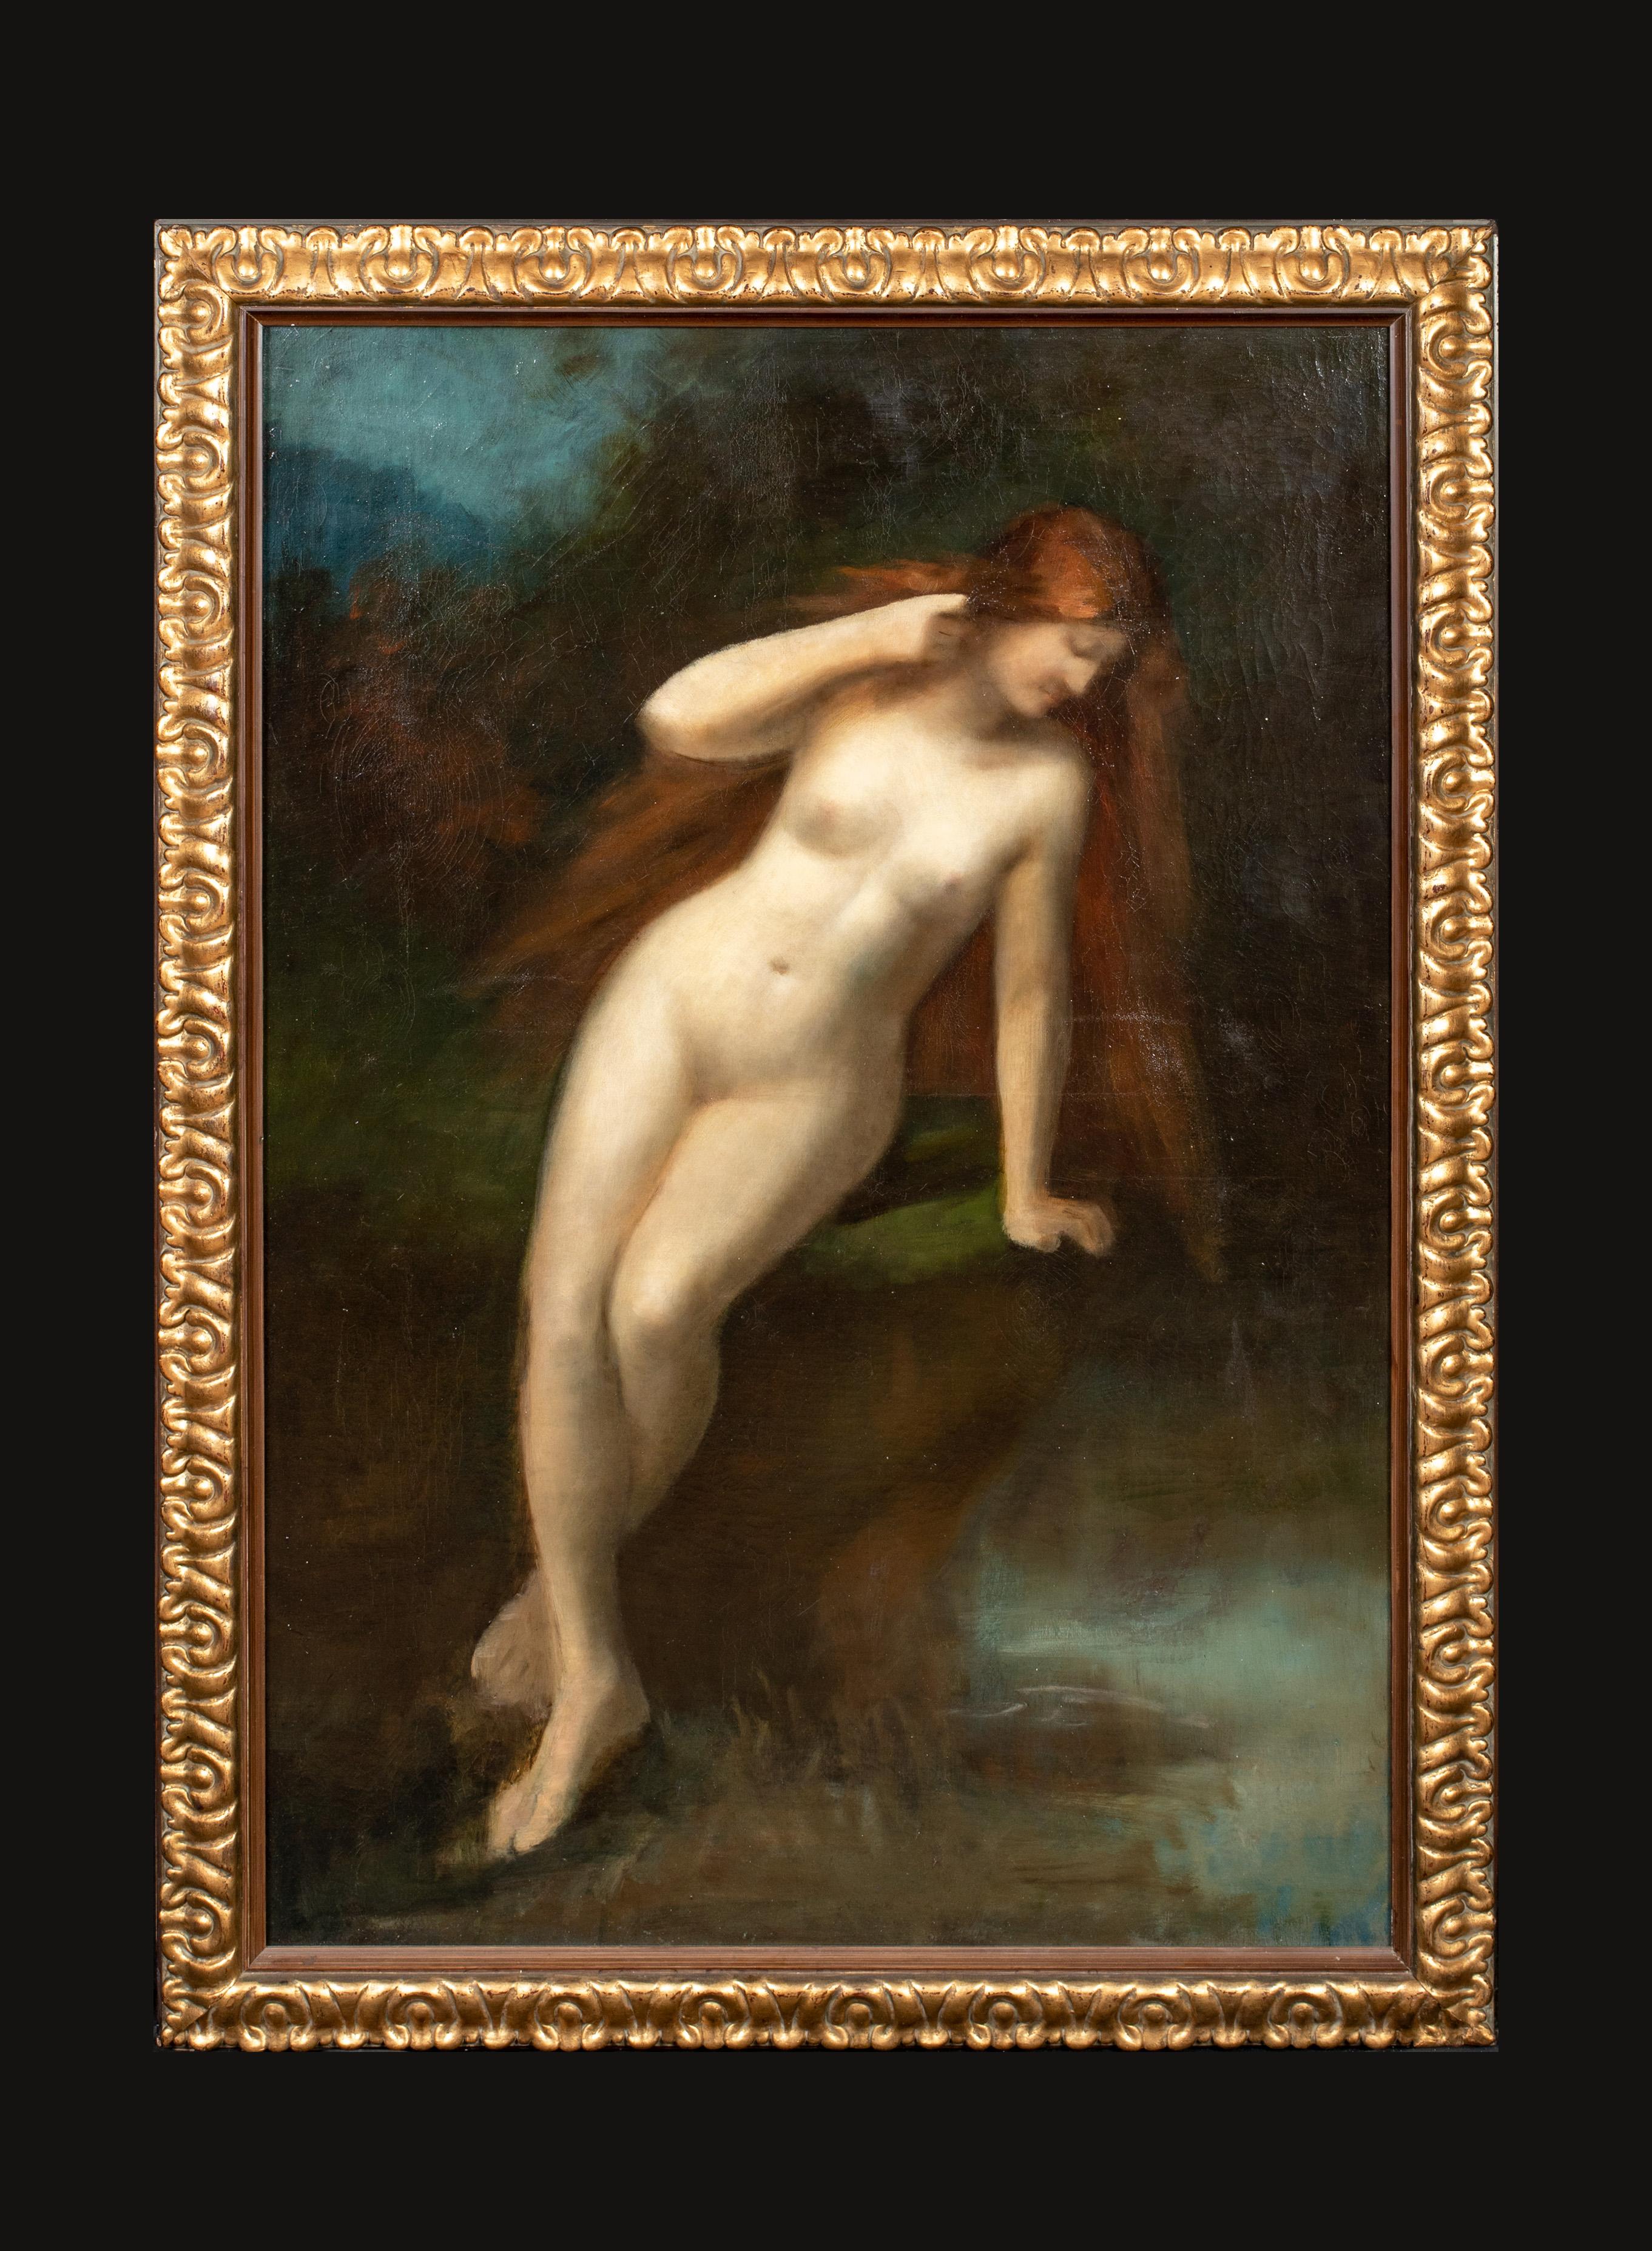 Portrait Of A Red Haired Nude, 19th Century  - Black Portrait Painting by Jean-Jacques Henner